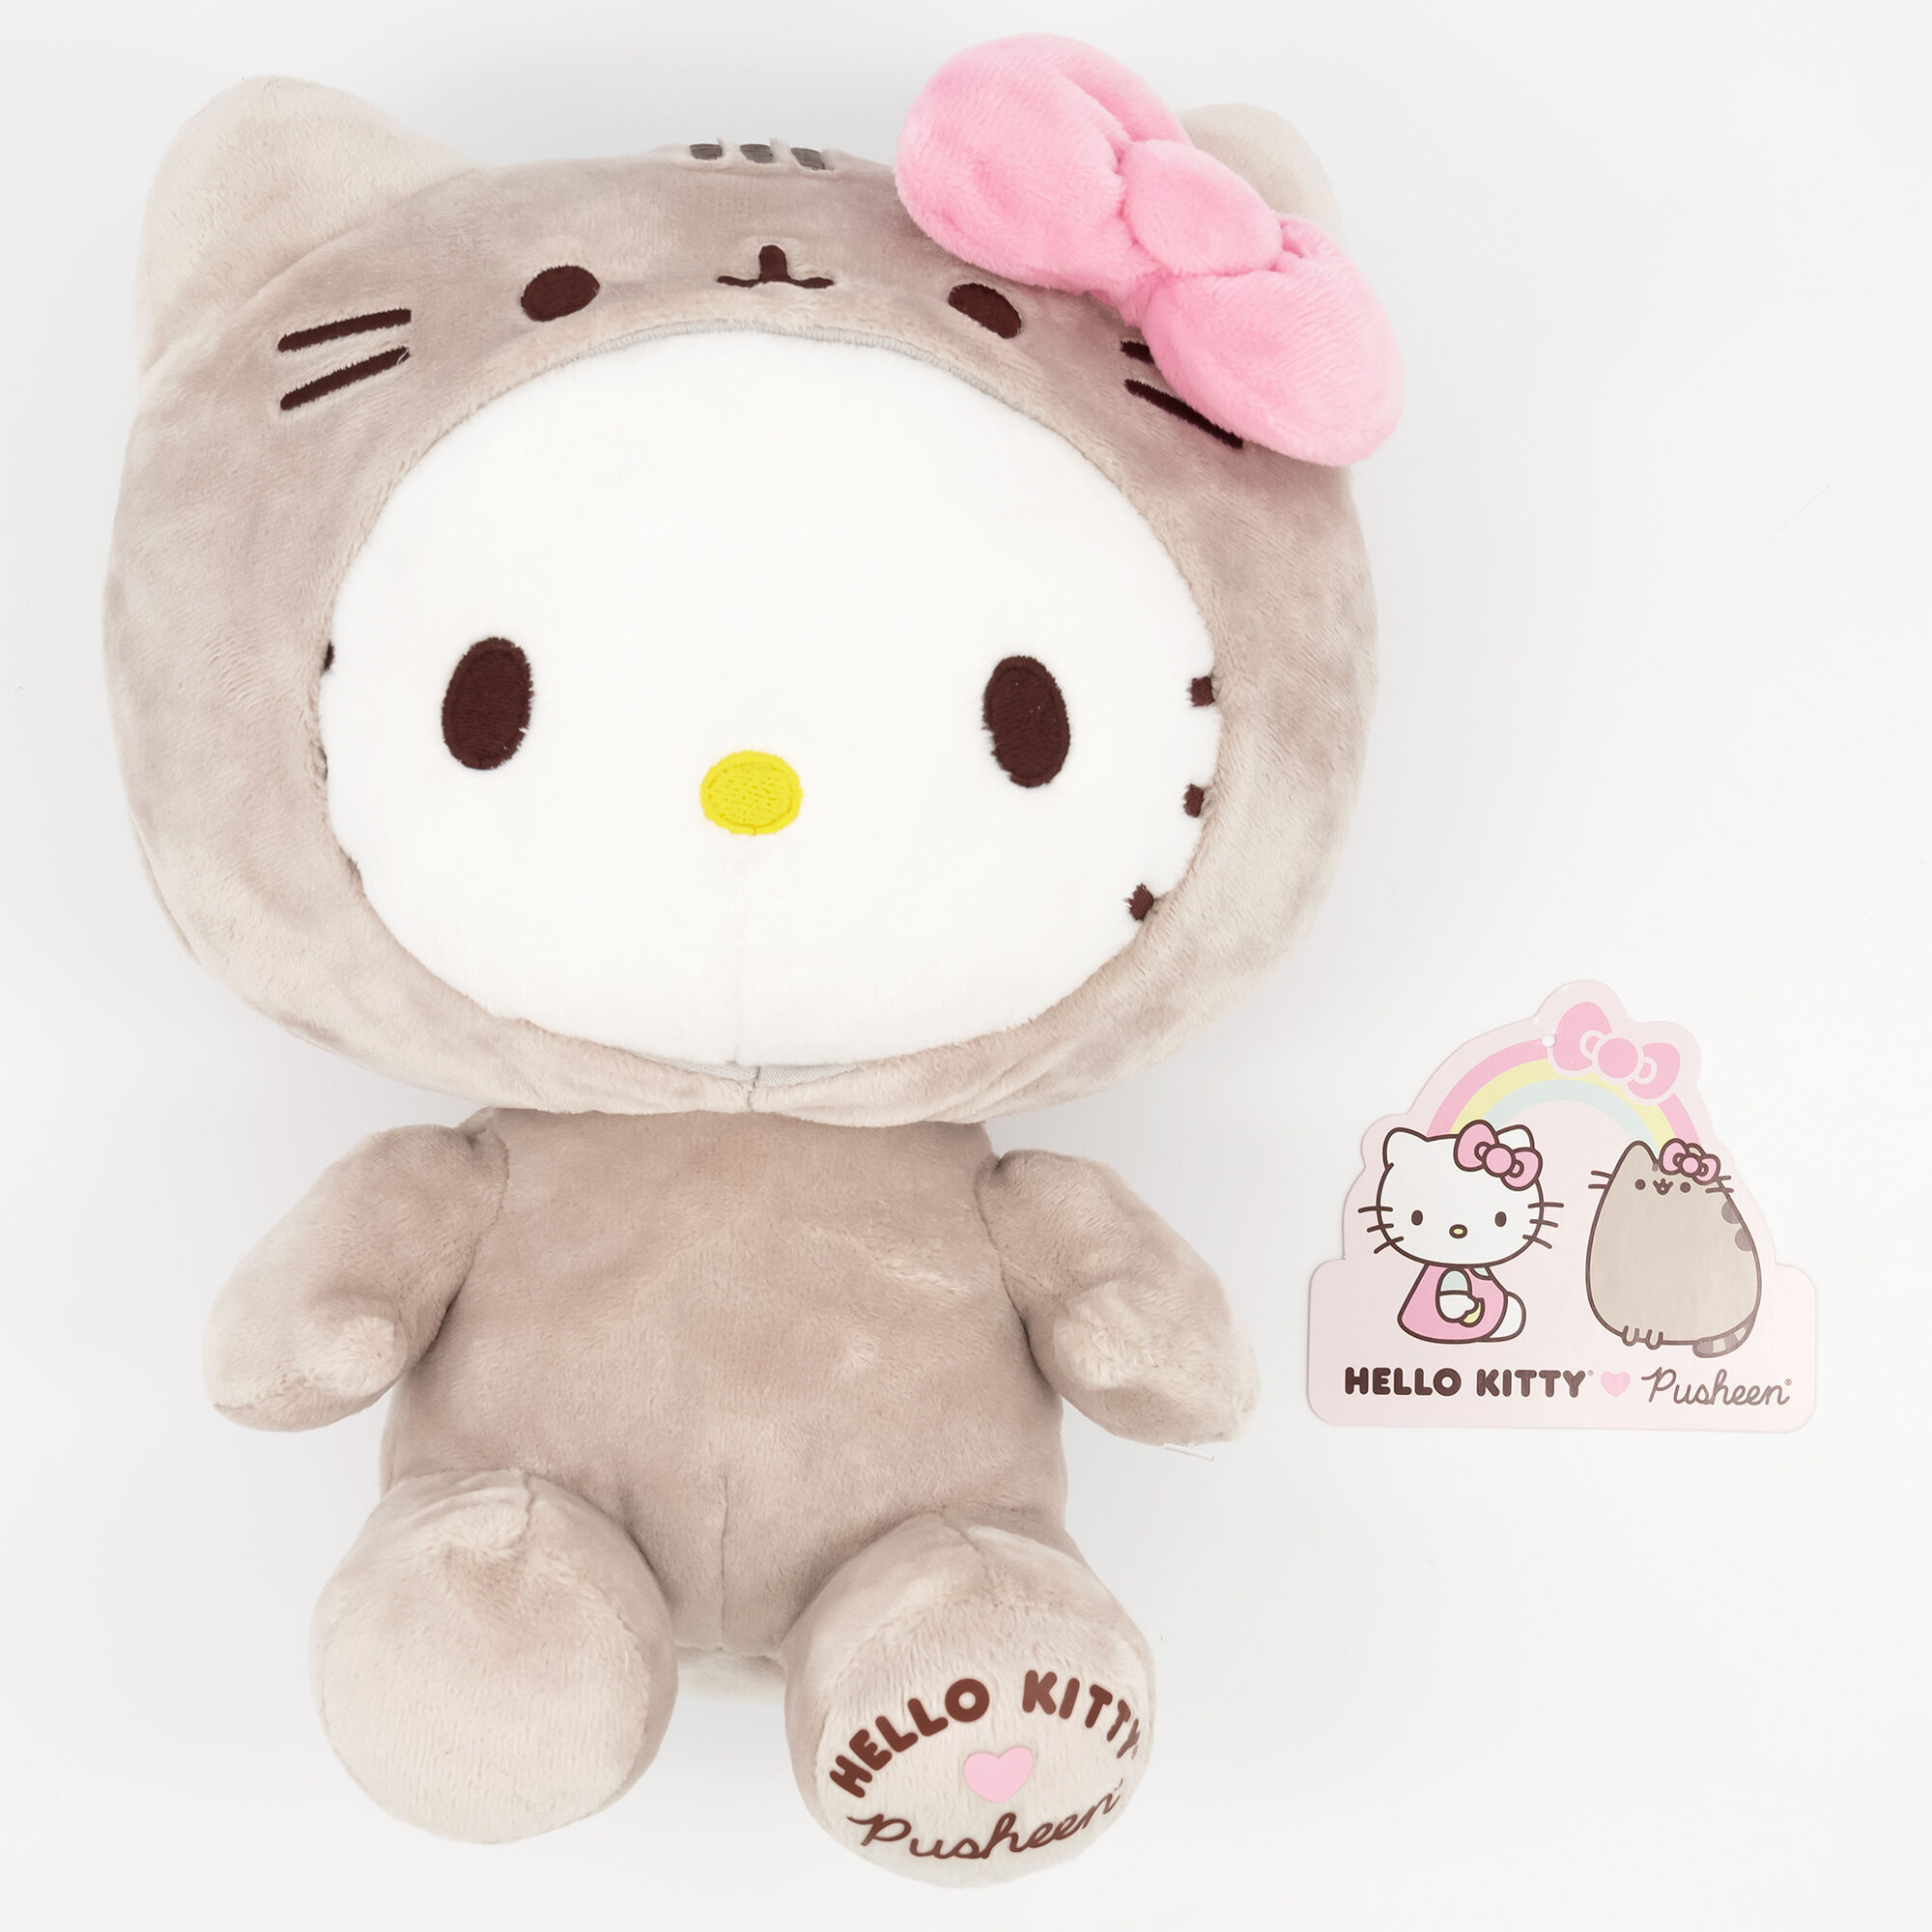 Hello Kitty® x Pusheen® Costumed Soft Toy